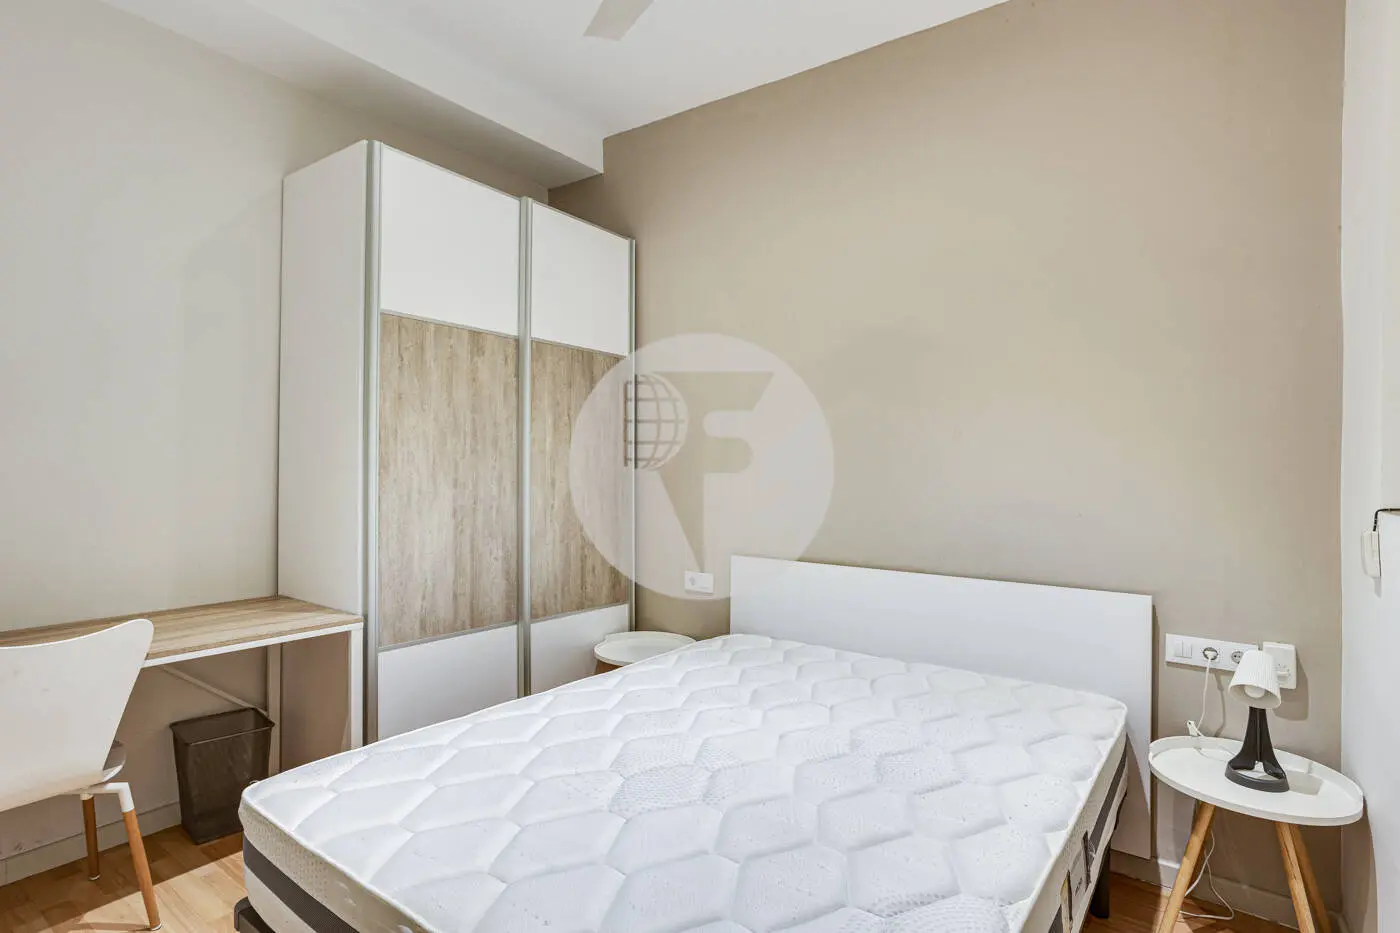 Magnificent apartment for sale next to Pl Universitat of 114m2 according to the land registry, located on Tallers Street in the Ciutat Vella neighborhood of Barcelona 9